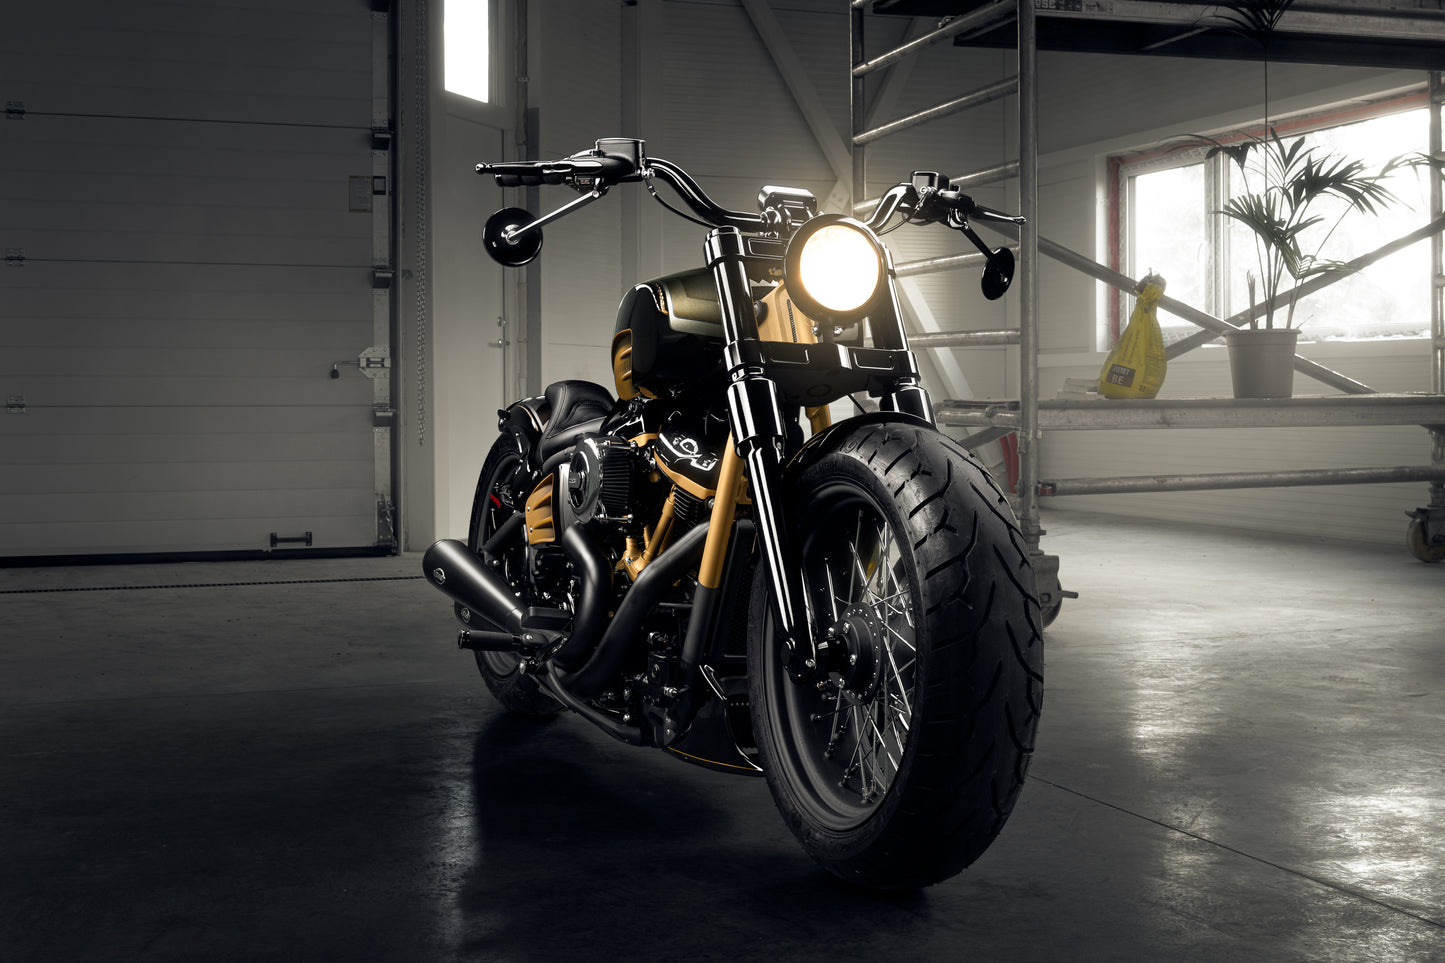 Harley Davidson motorcycle with Killer Custom "Classic" mirrors from the front in an industrial environment